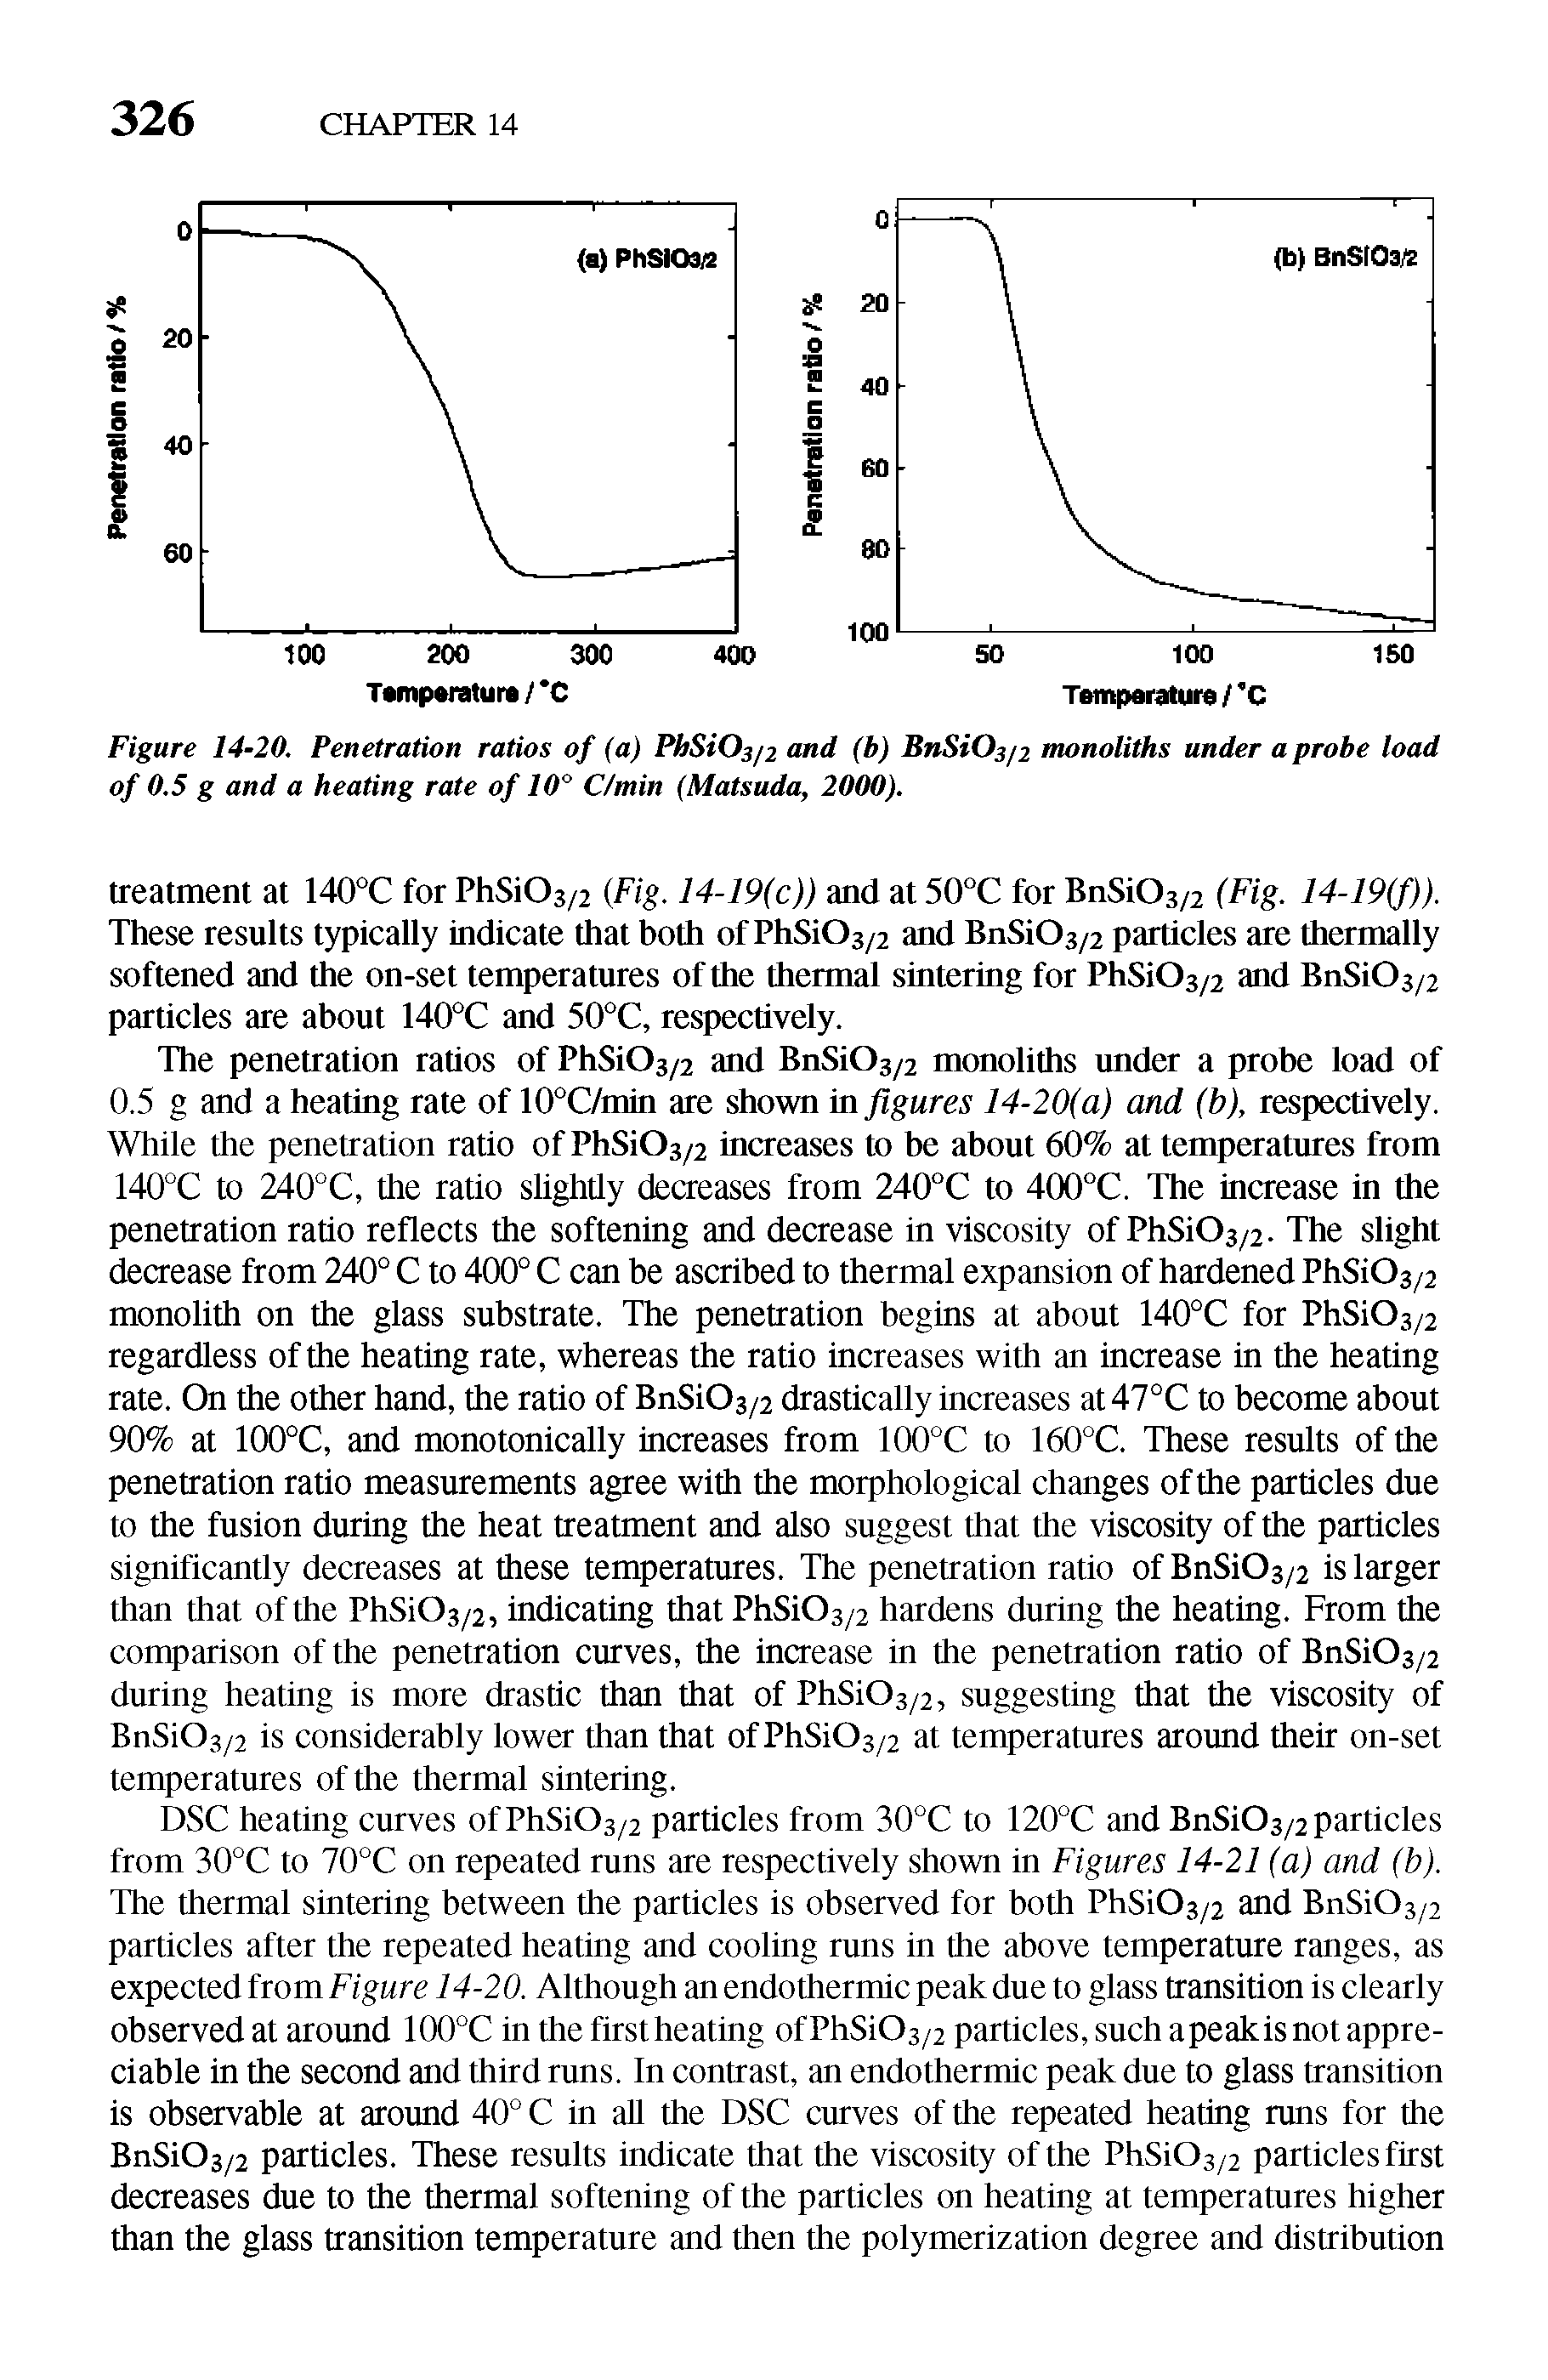 Figure 14-20. Penetration ratios of (a) PhSiOs/z and (b) BnSiOs/2 nwnoliths under a probe load of 0.5 g and a heating rate of lO " C/min (Matsuda, 2000).